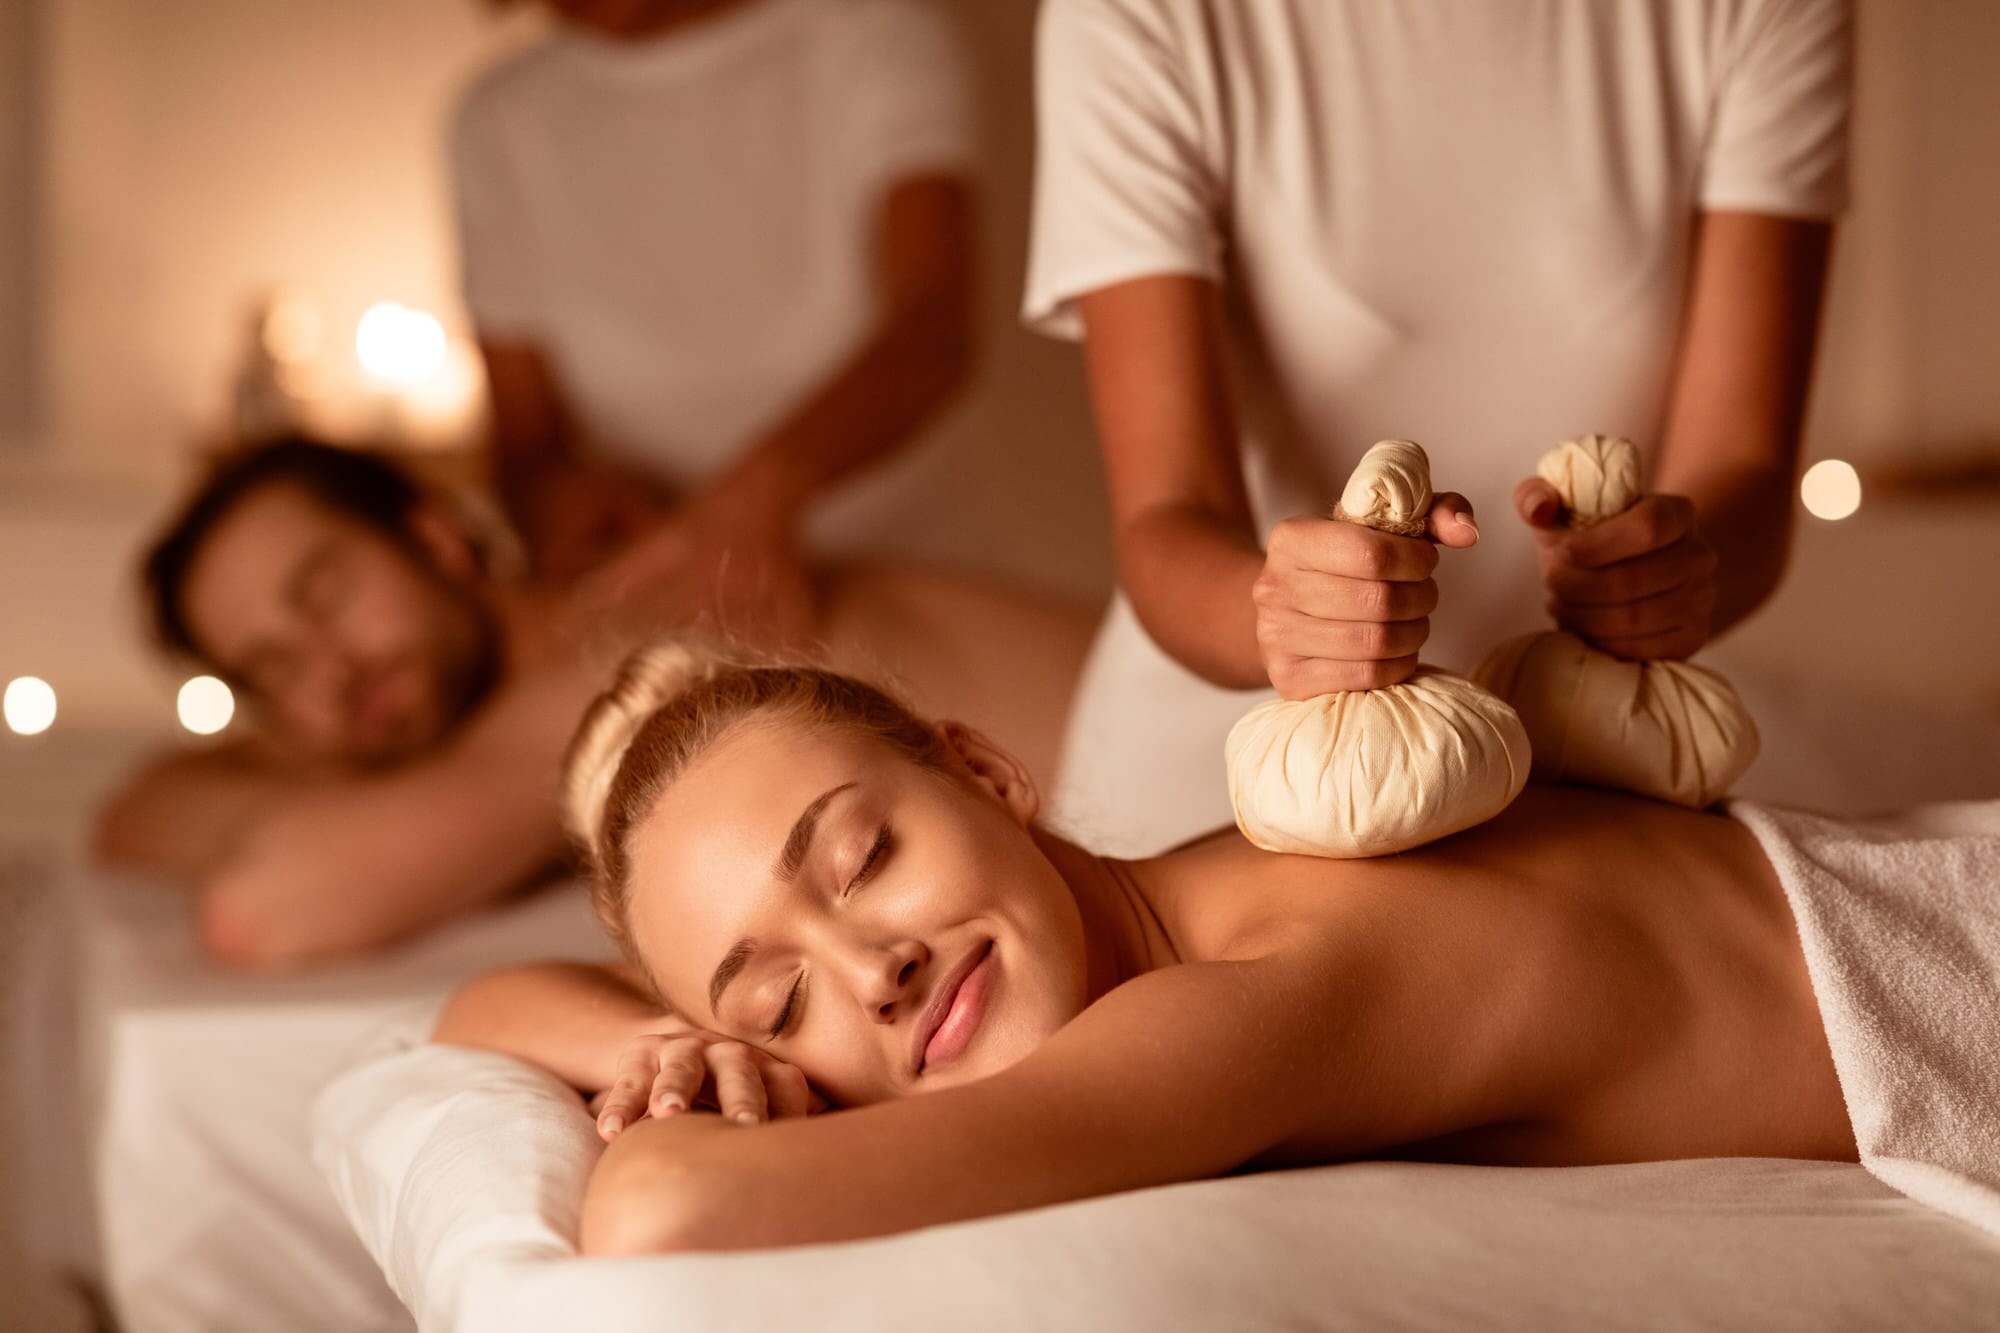 Relaxed engaged couple At Exotic Spa Resort, Lying With Eyes Closed Receiving Thai Massage With Aromatic Bags. Body Beauty Treatment, Relaxation And Wellness